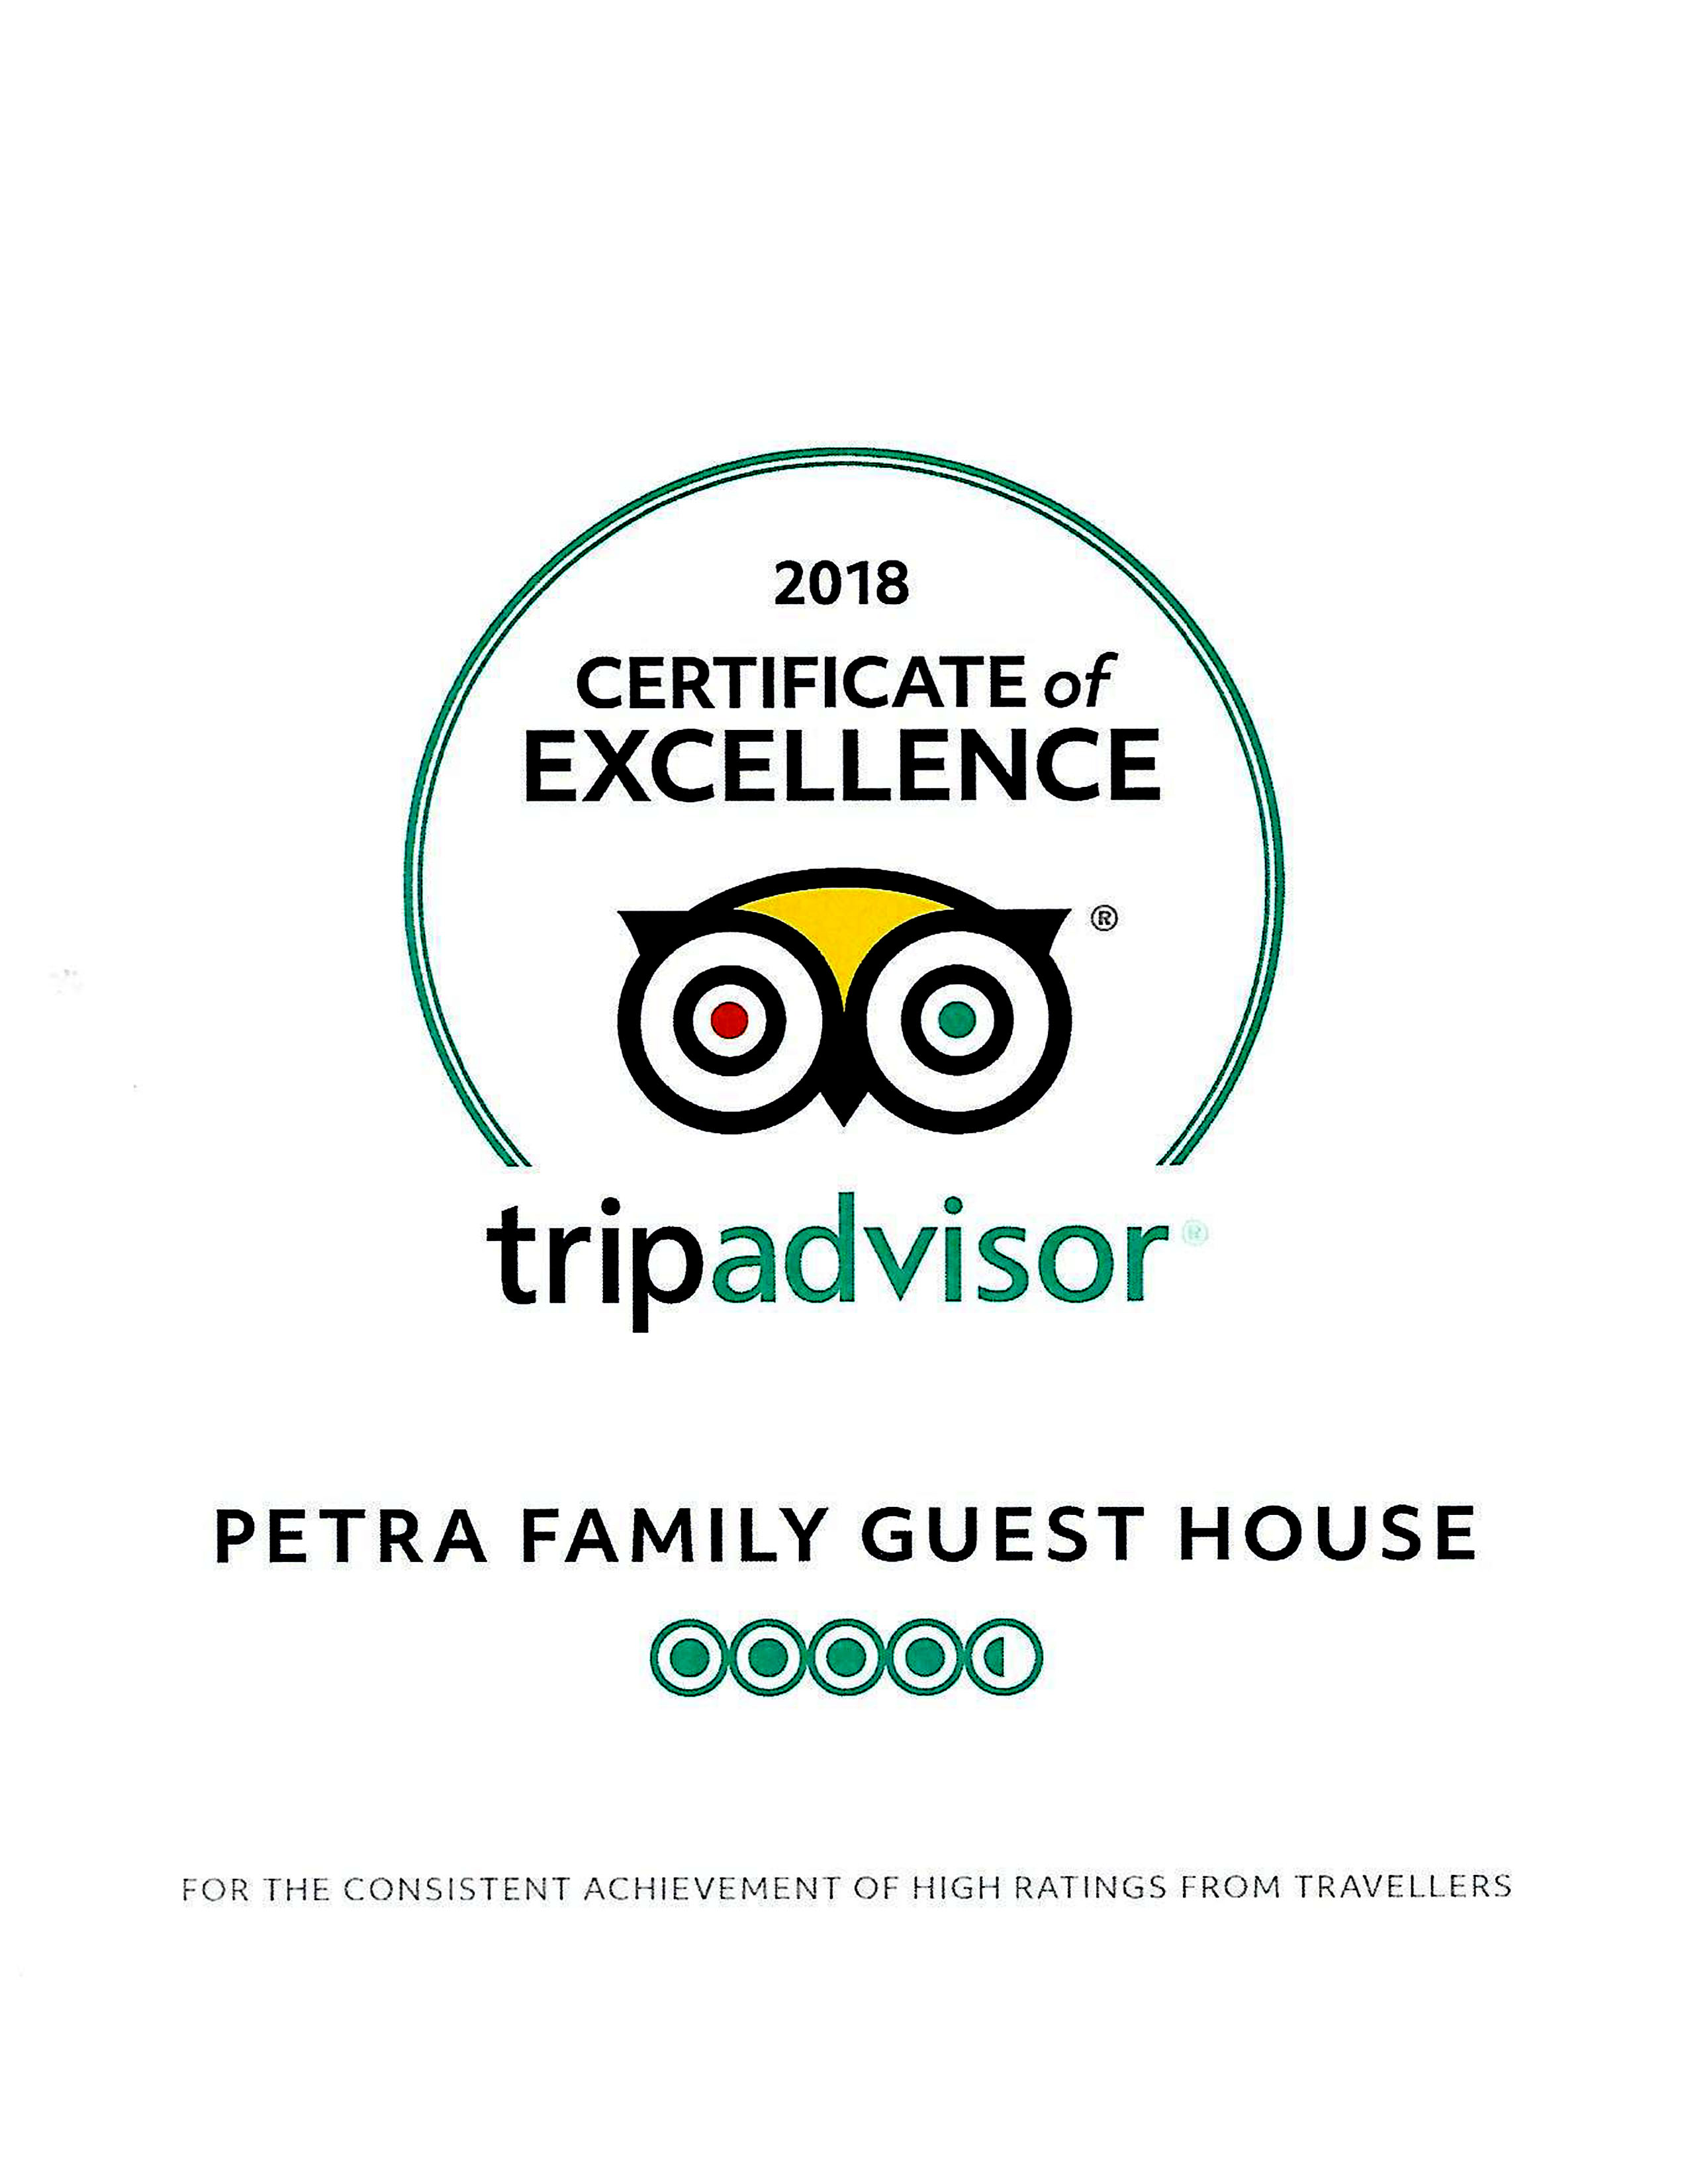 Petra Family Guest House